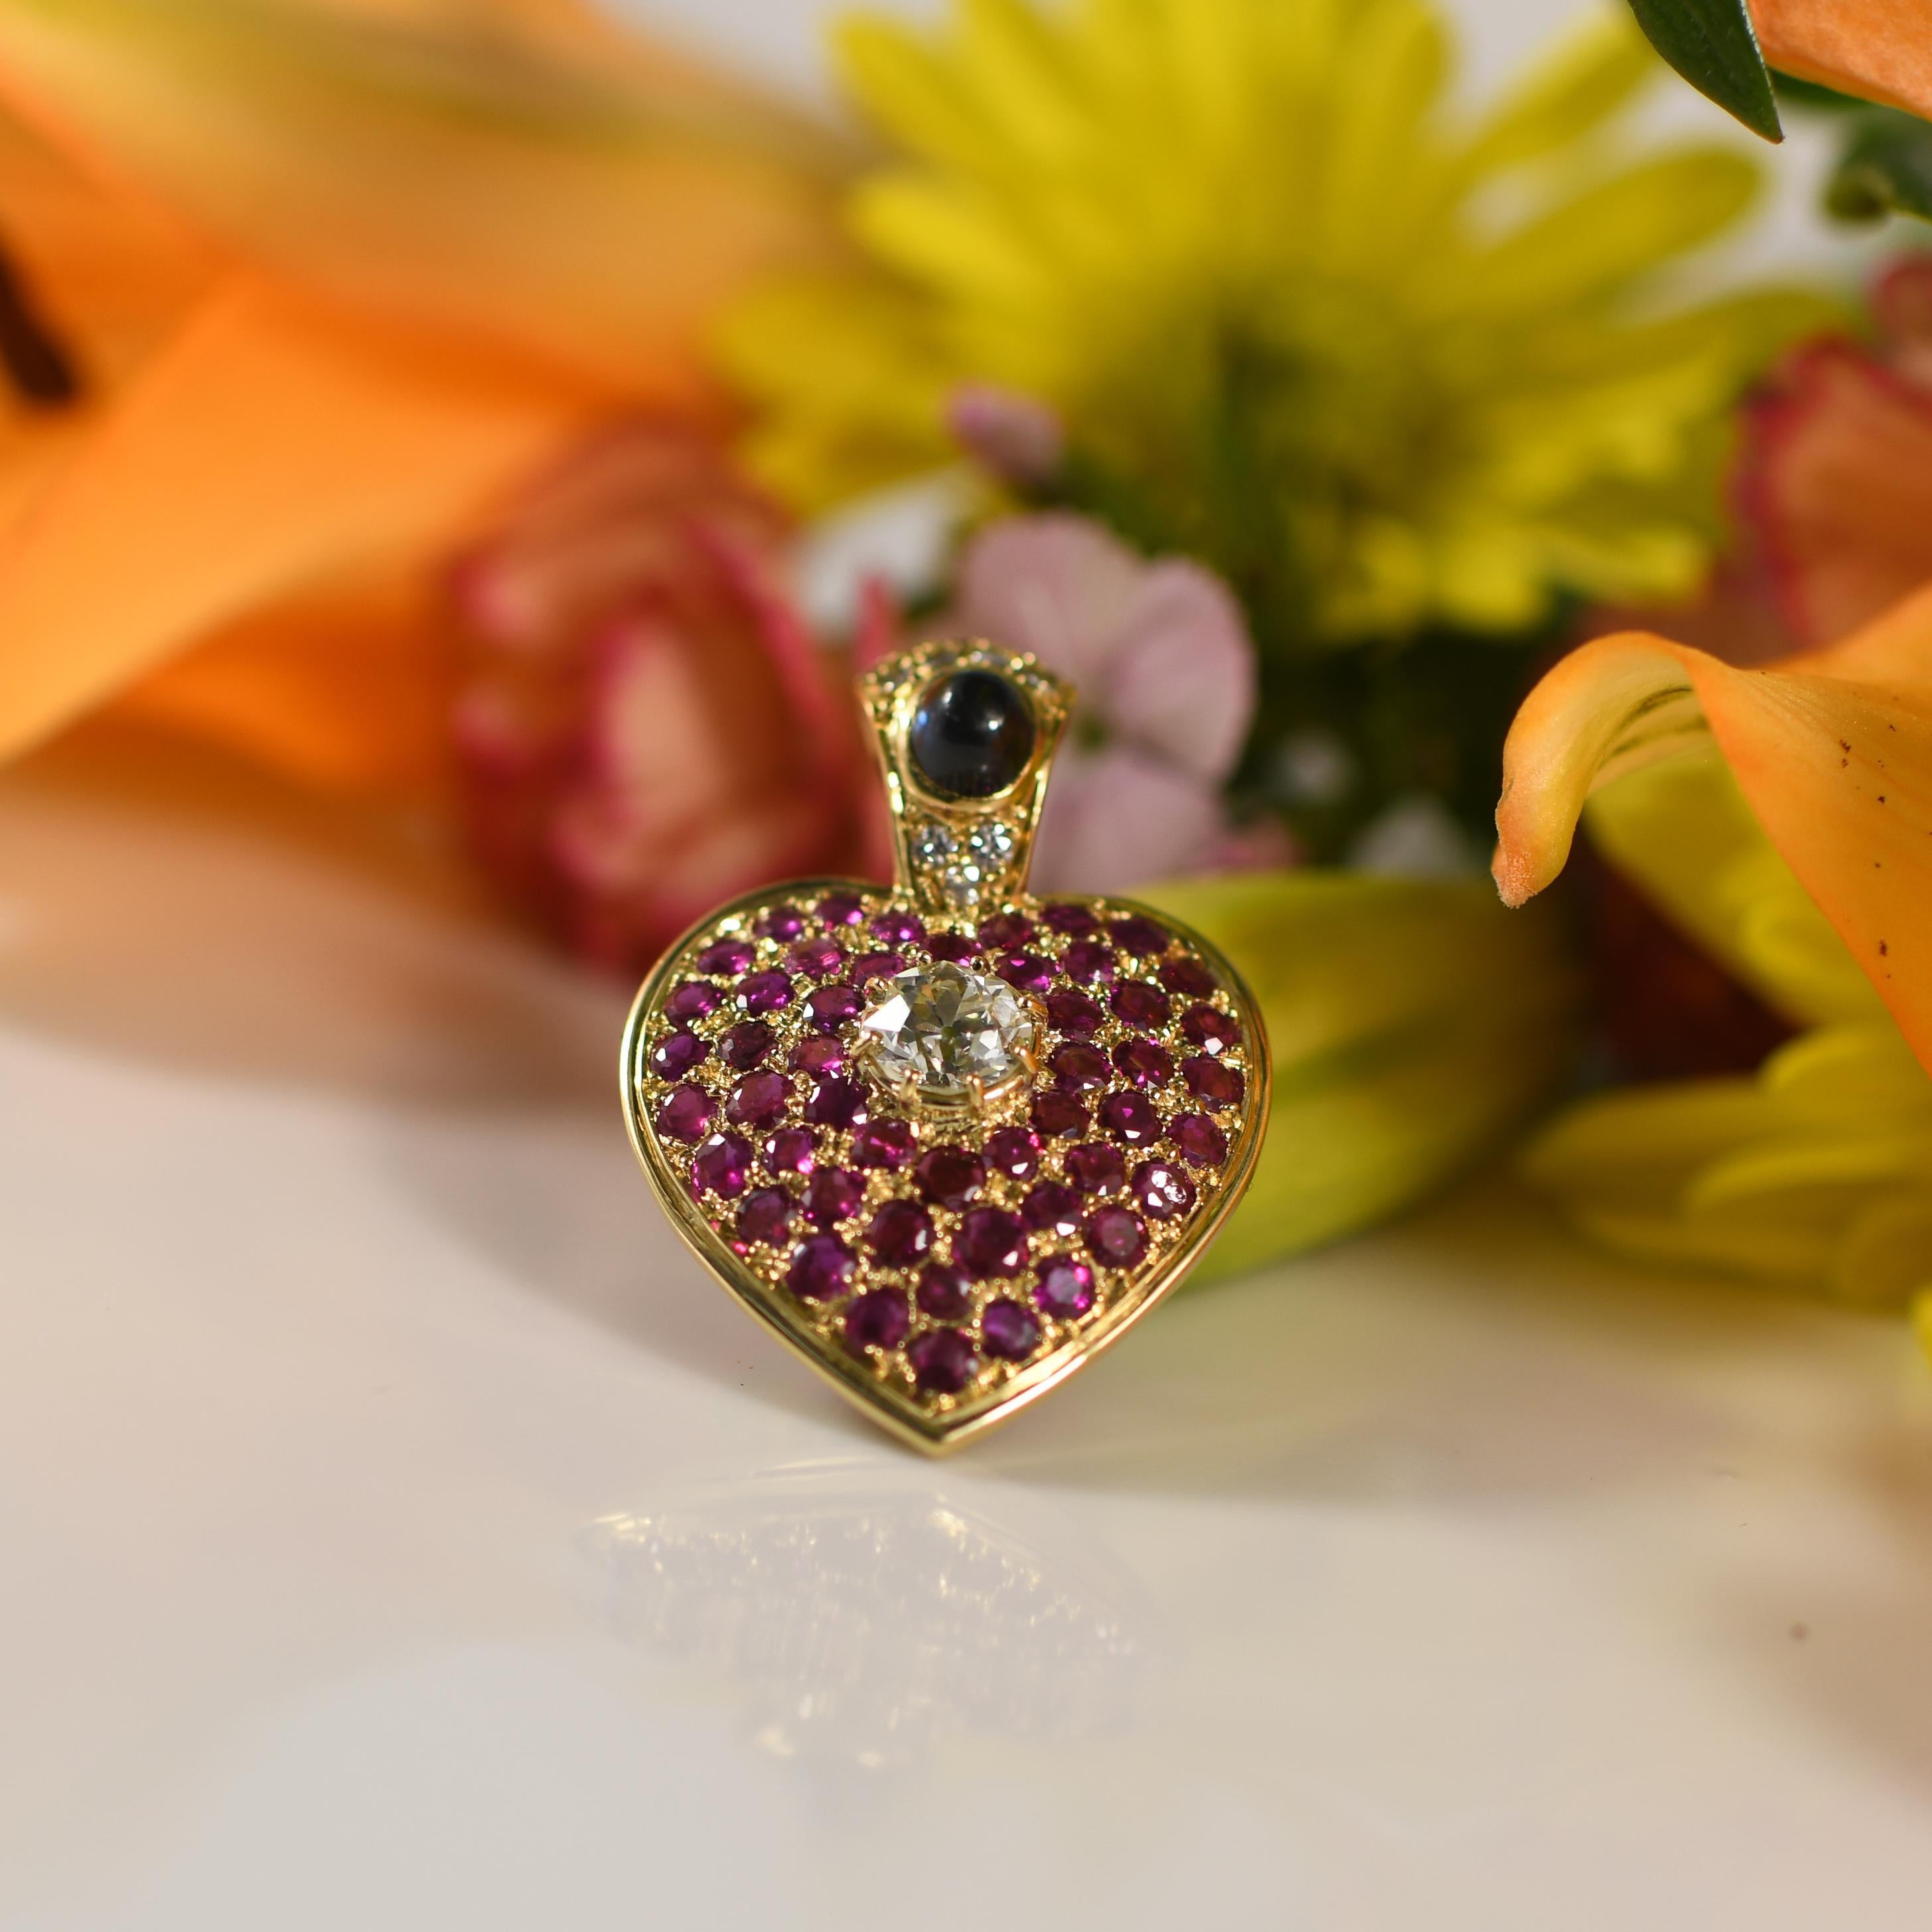 Embrace romance and sophistication with this exquisite heart-shaped pendant, crafted in luxurious 18K yellow gold. At its center, a radiant 1.30 carat old European cut diamond steals the show, capturing the essence of enduring love and timeless